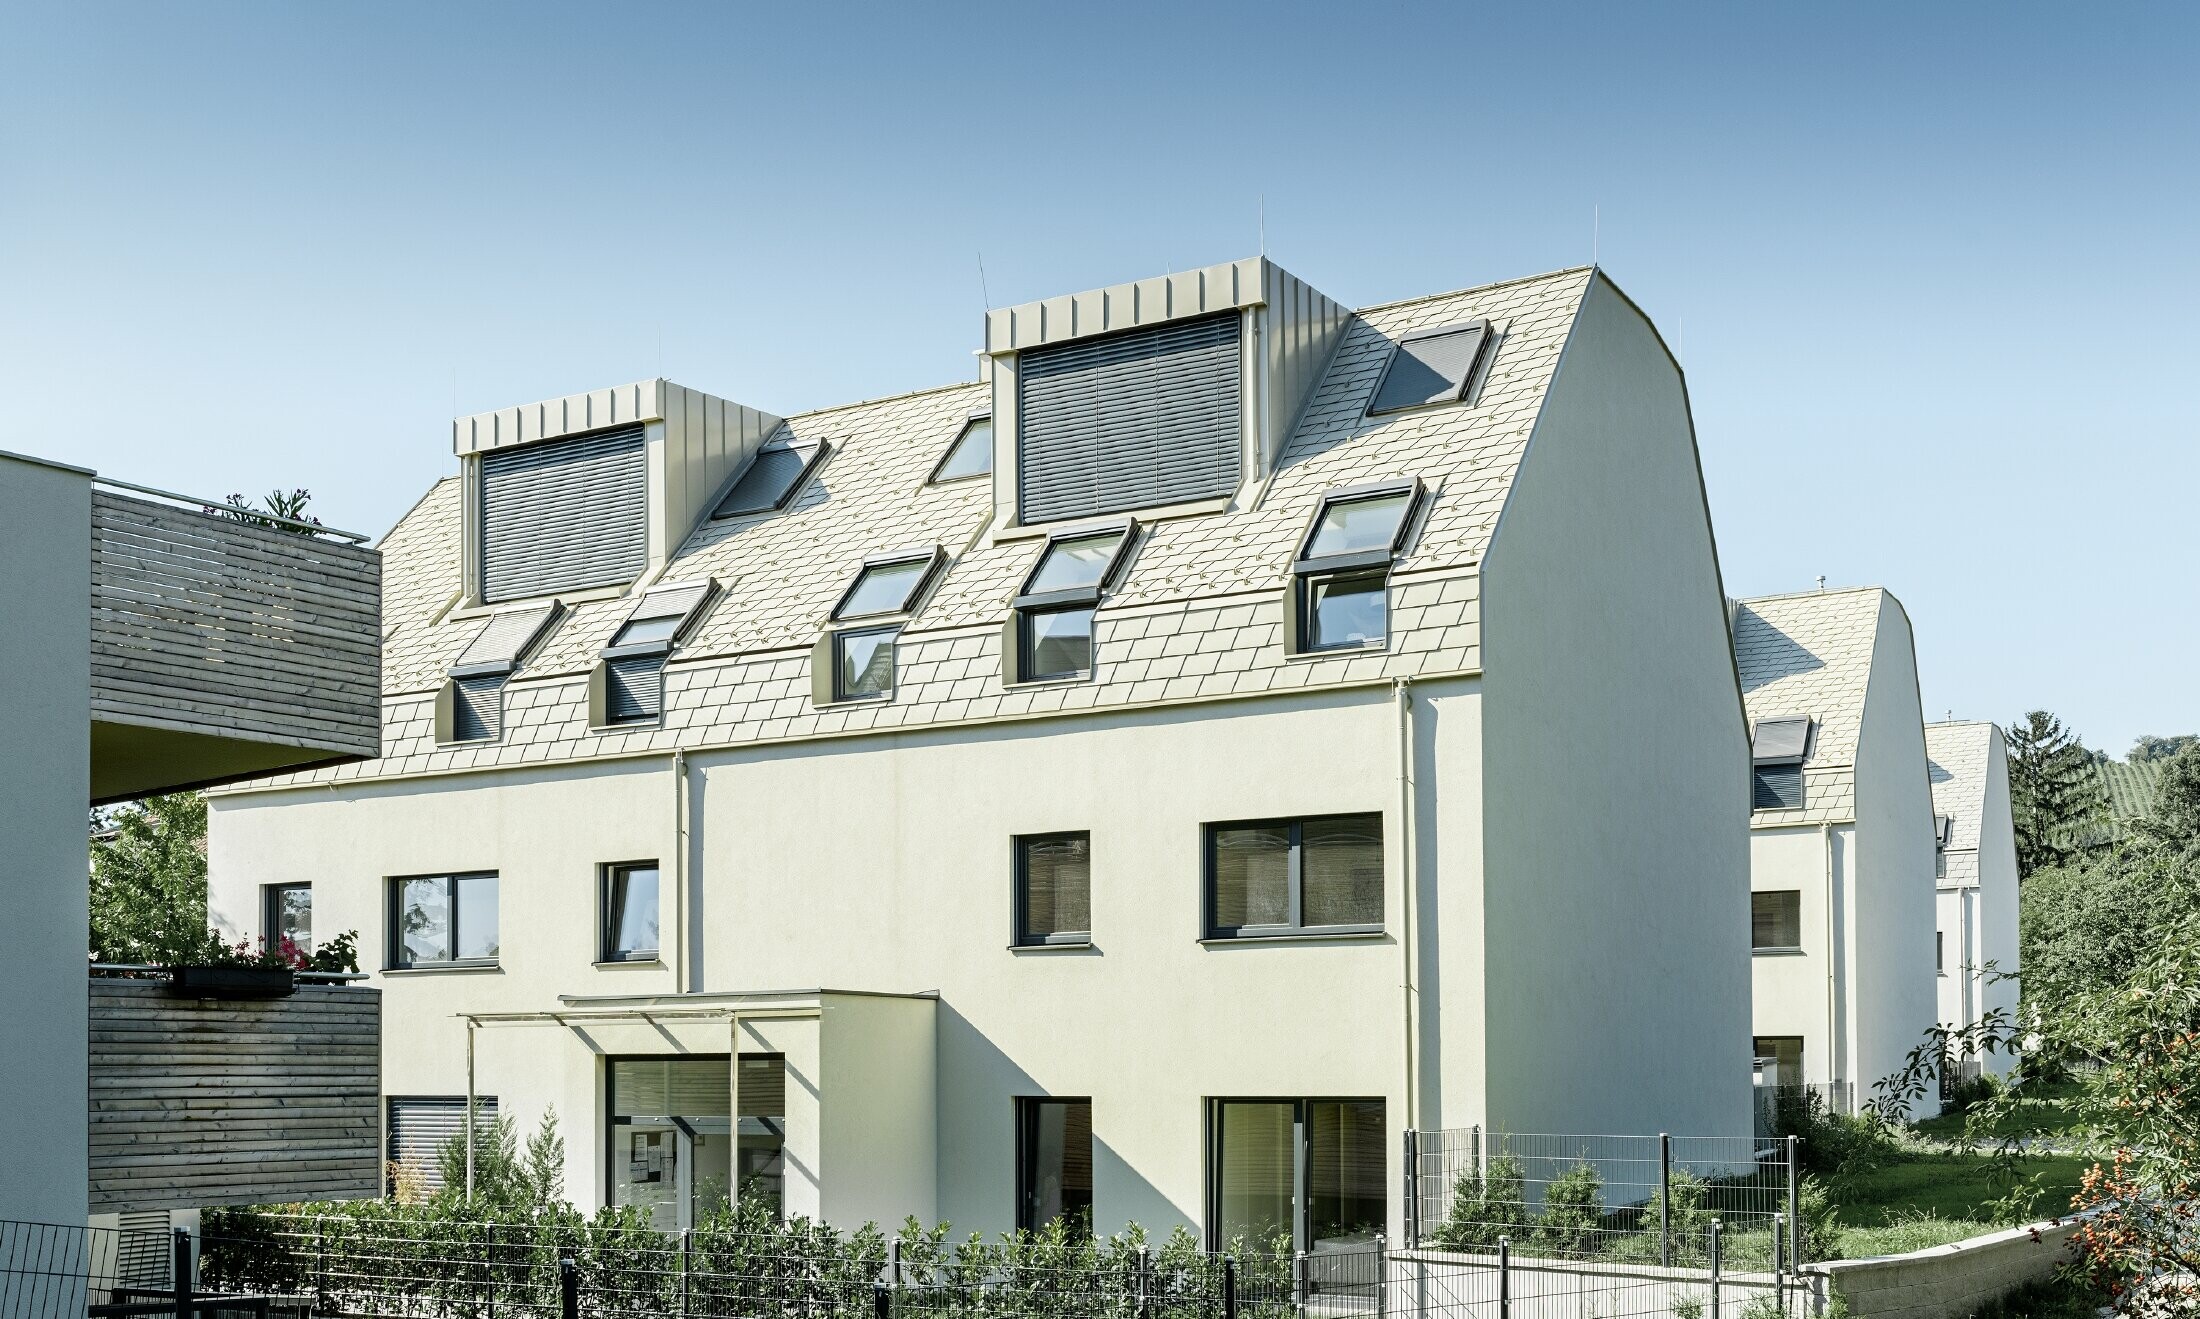 New residential complex with a large aluminium roof surface and a host of roof windows